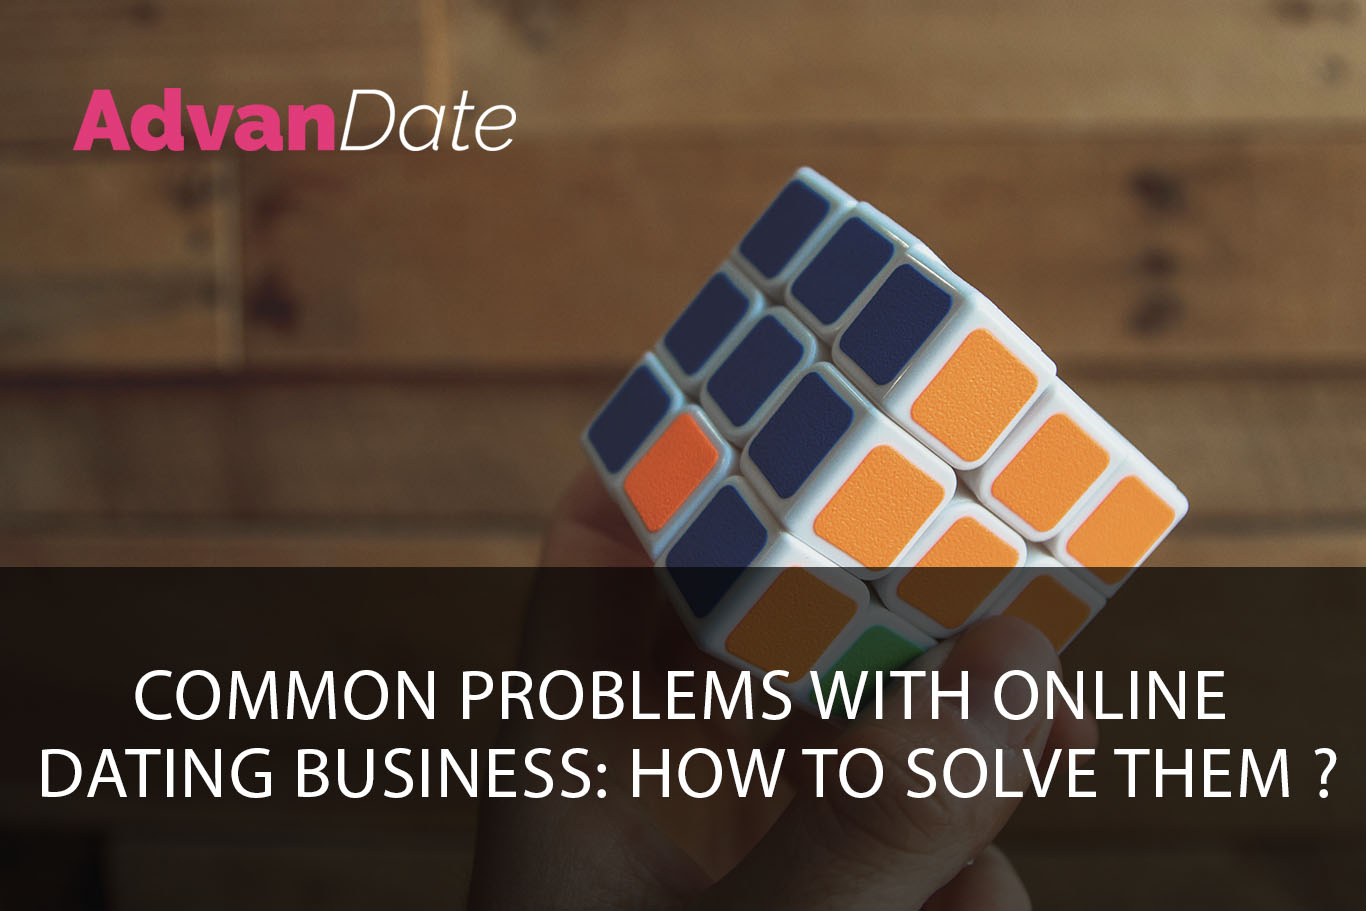 Common problems with online dating business: how to solve them?